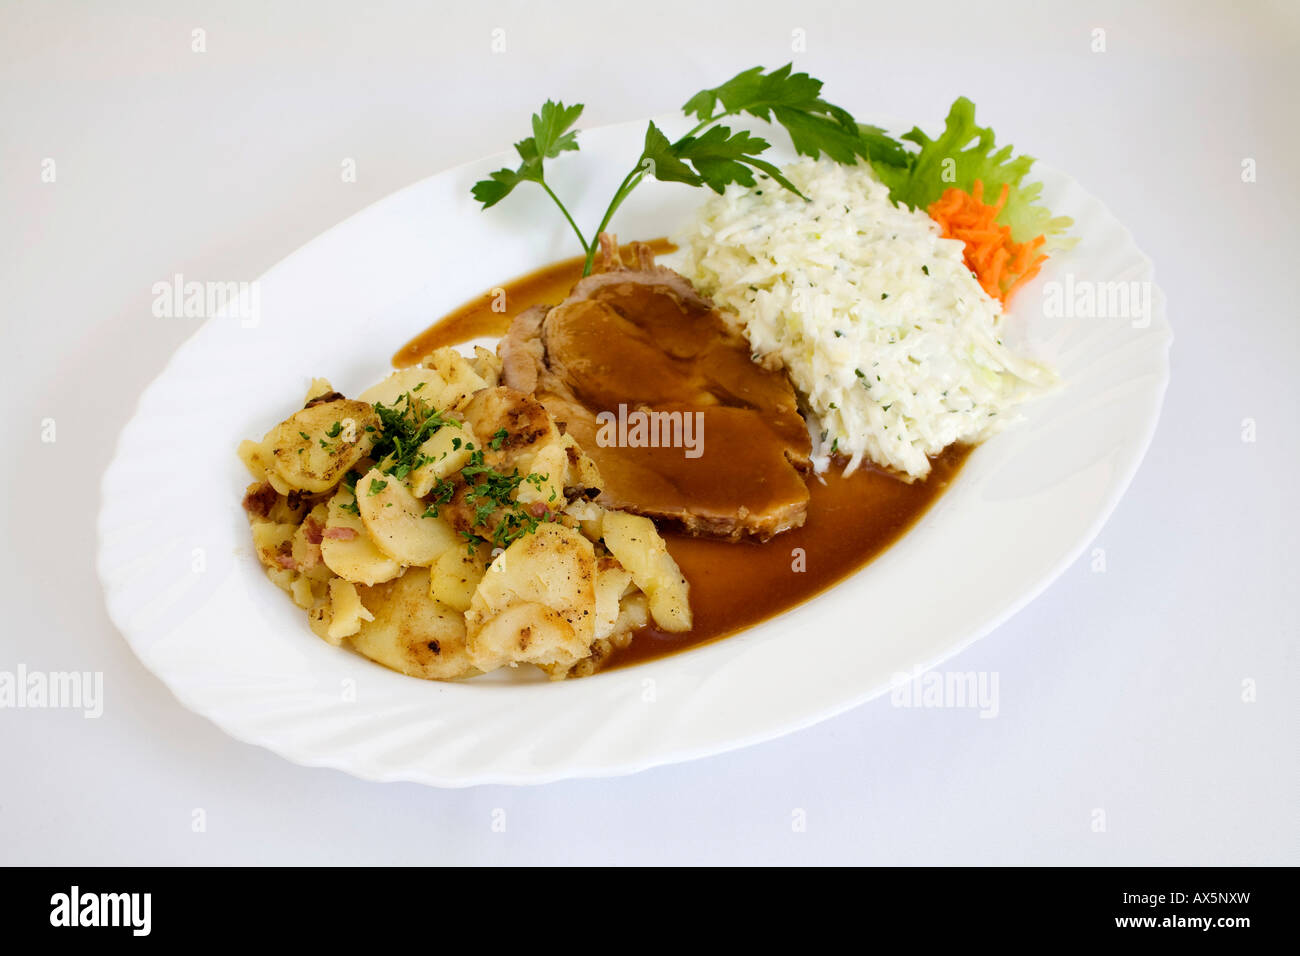 Pork roast with gravy, coleslaw and roasted potatoes Stock Photo